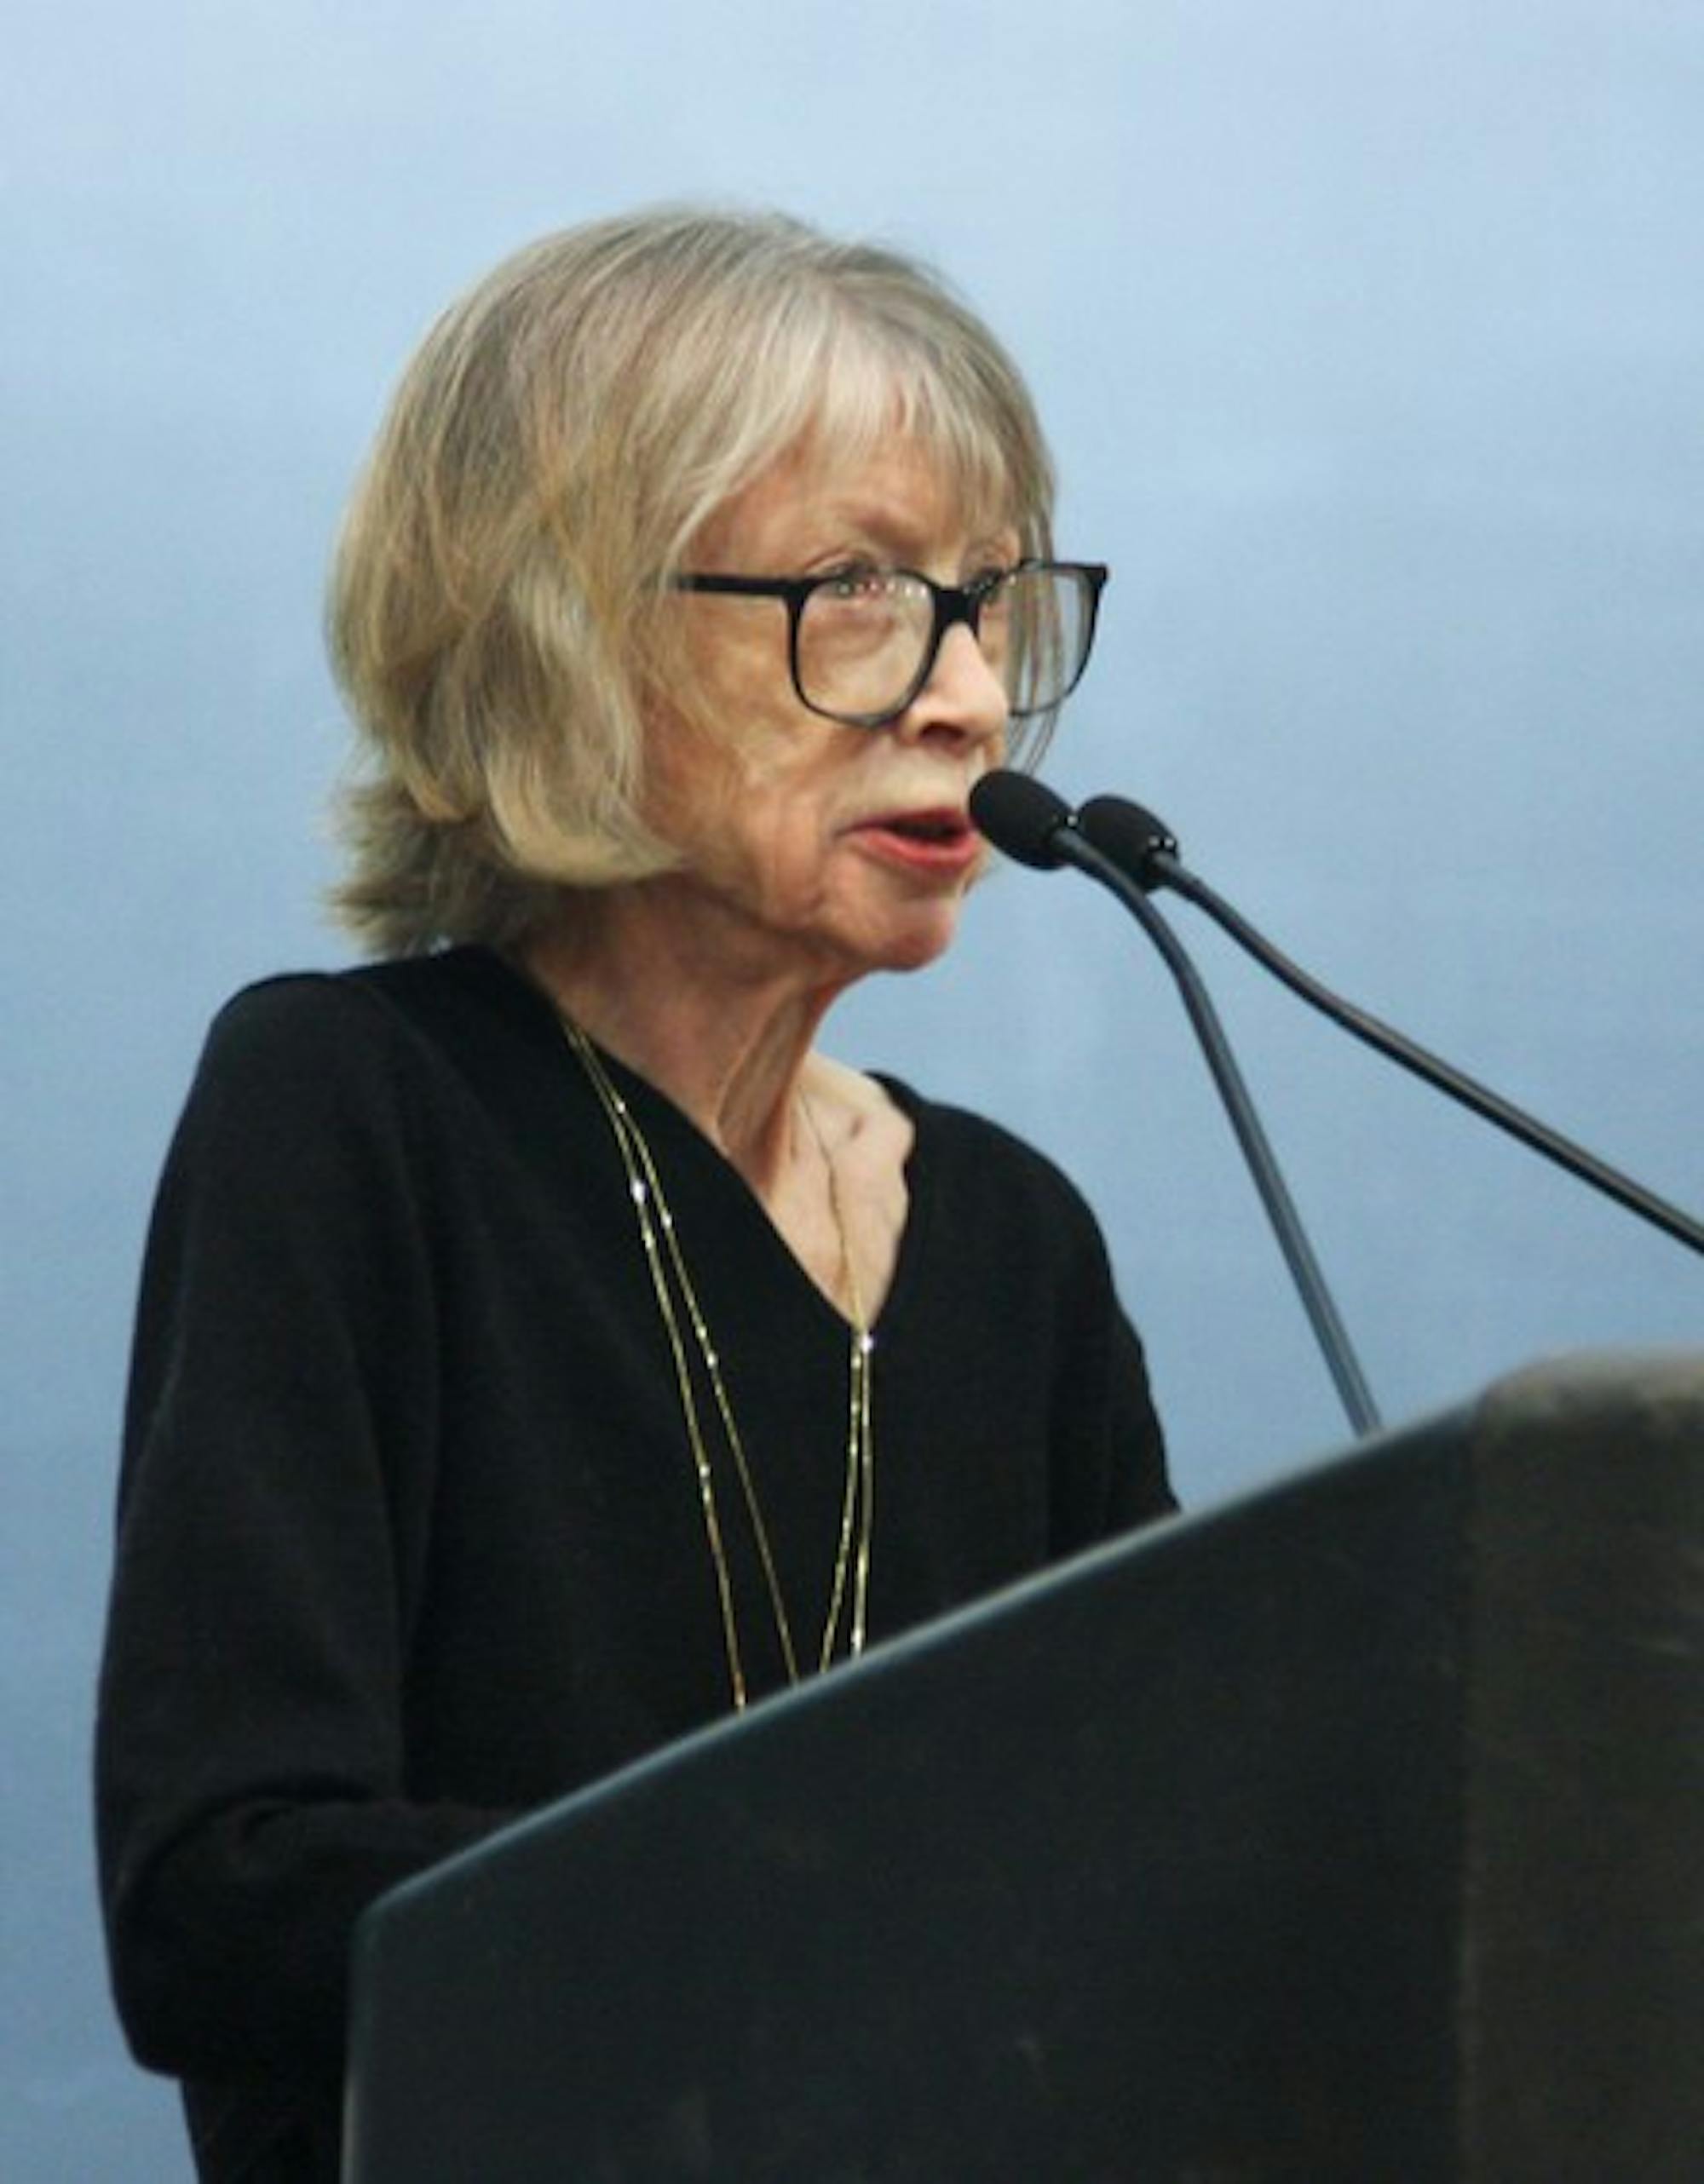 Didion will meet with students from the history, English, film and Latin American studies departments during her two days at Dartmouth.